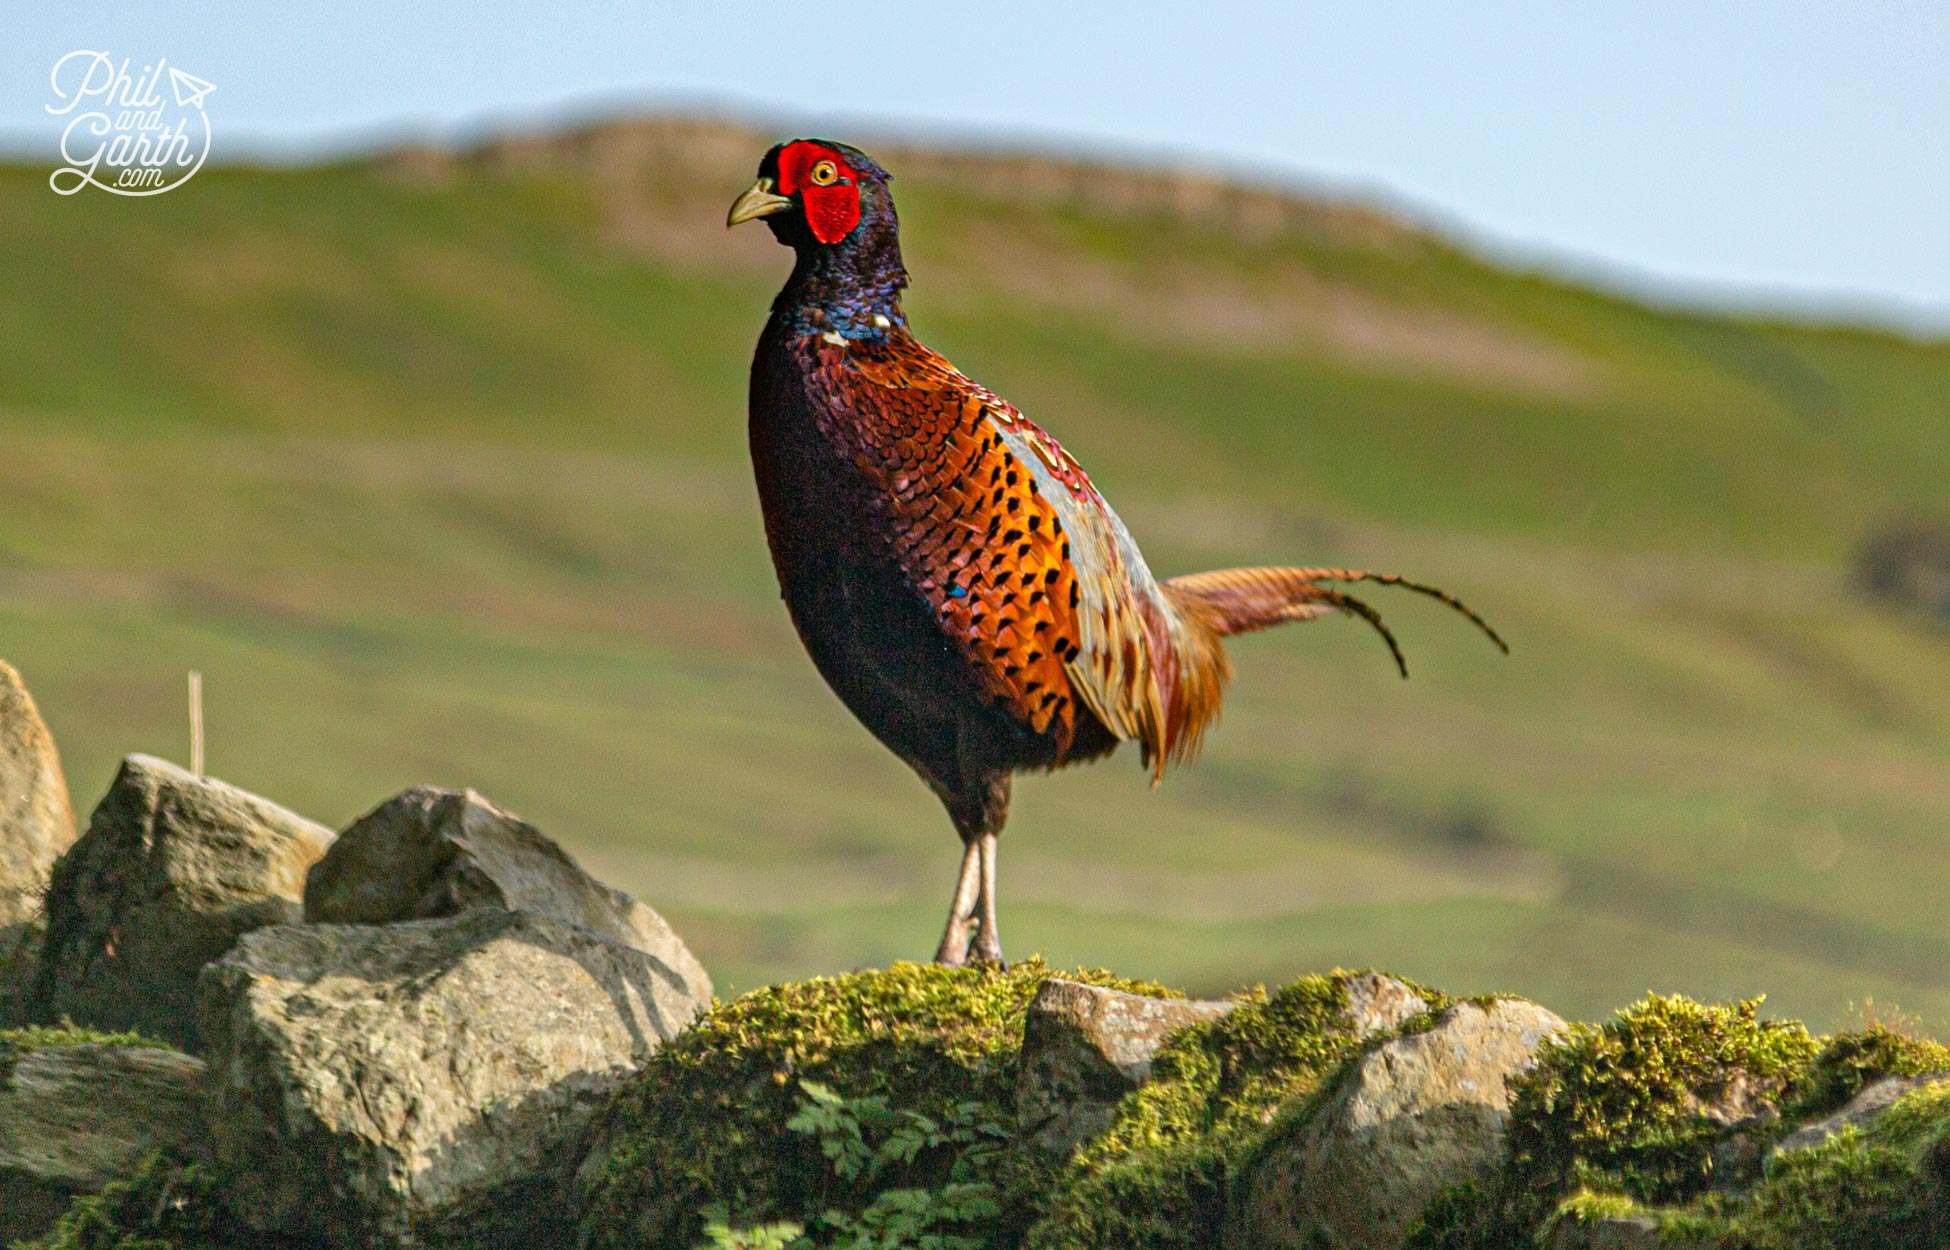 So many beautiful pheasants and grouse around our holiday cottage